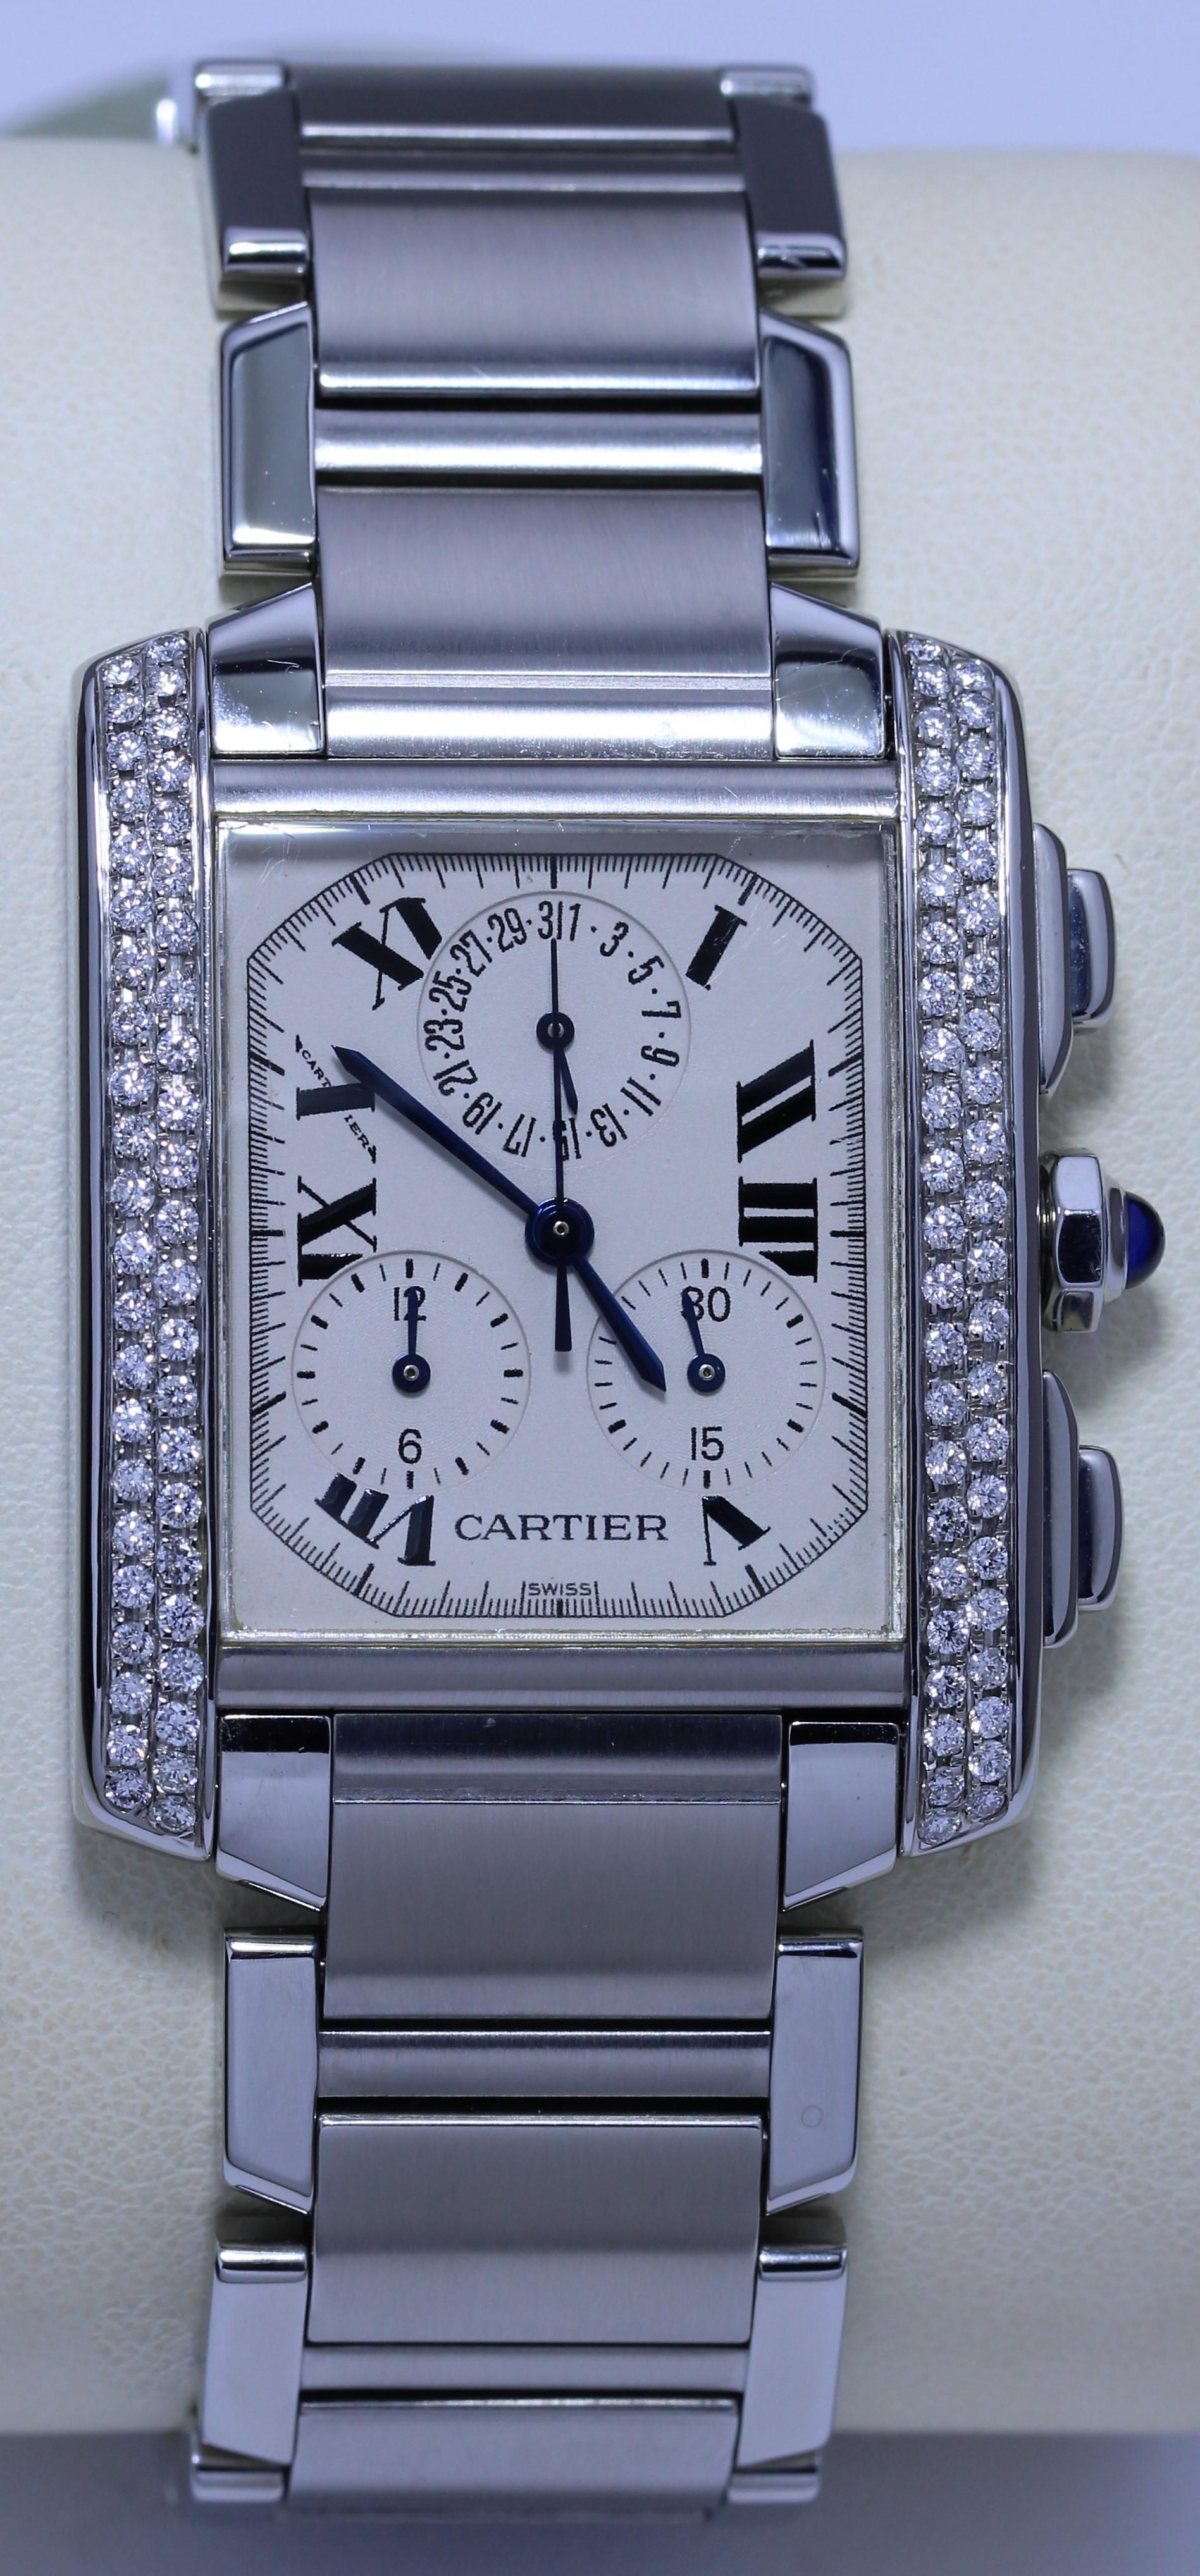 Cartier Diamond Studded Wristwatch
Rectangular face with bezel studded with diamonds
Roman numeral hour markers
172947127538-E
 Cartier Pre-Owned Tank Francaise W51004Q4
 Case Diameter: 28mm x 36mm
Band Size: 180mm
Cartier Tank Francaise Chronoflex